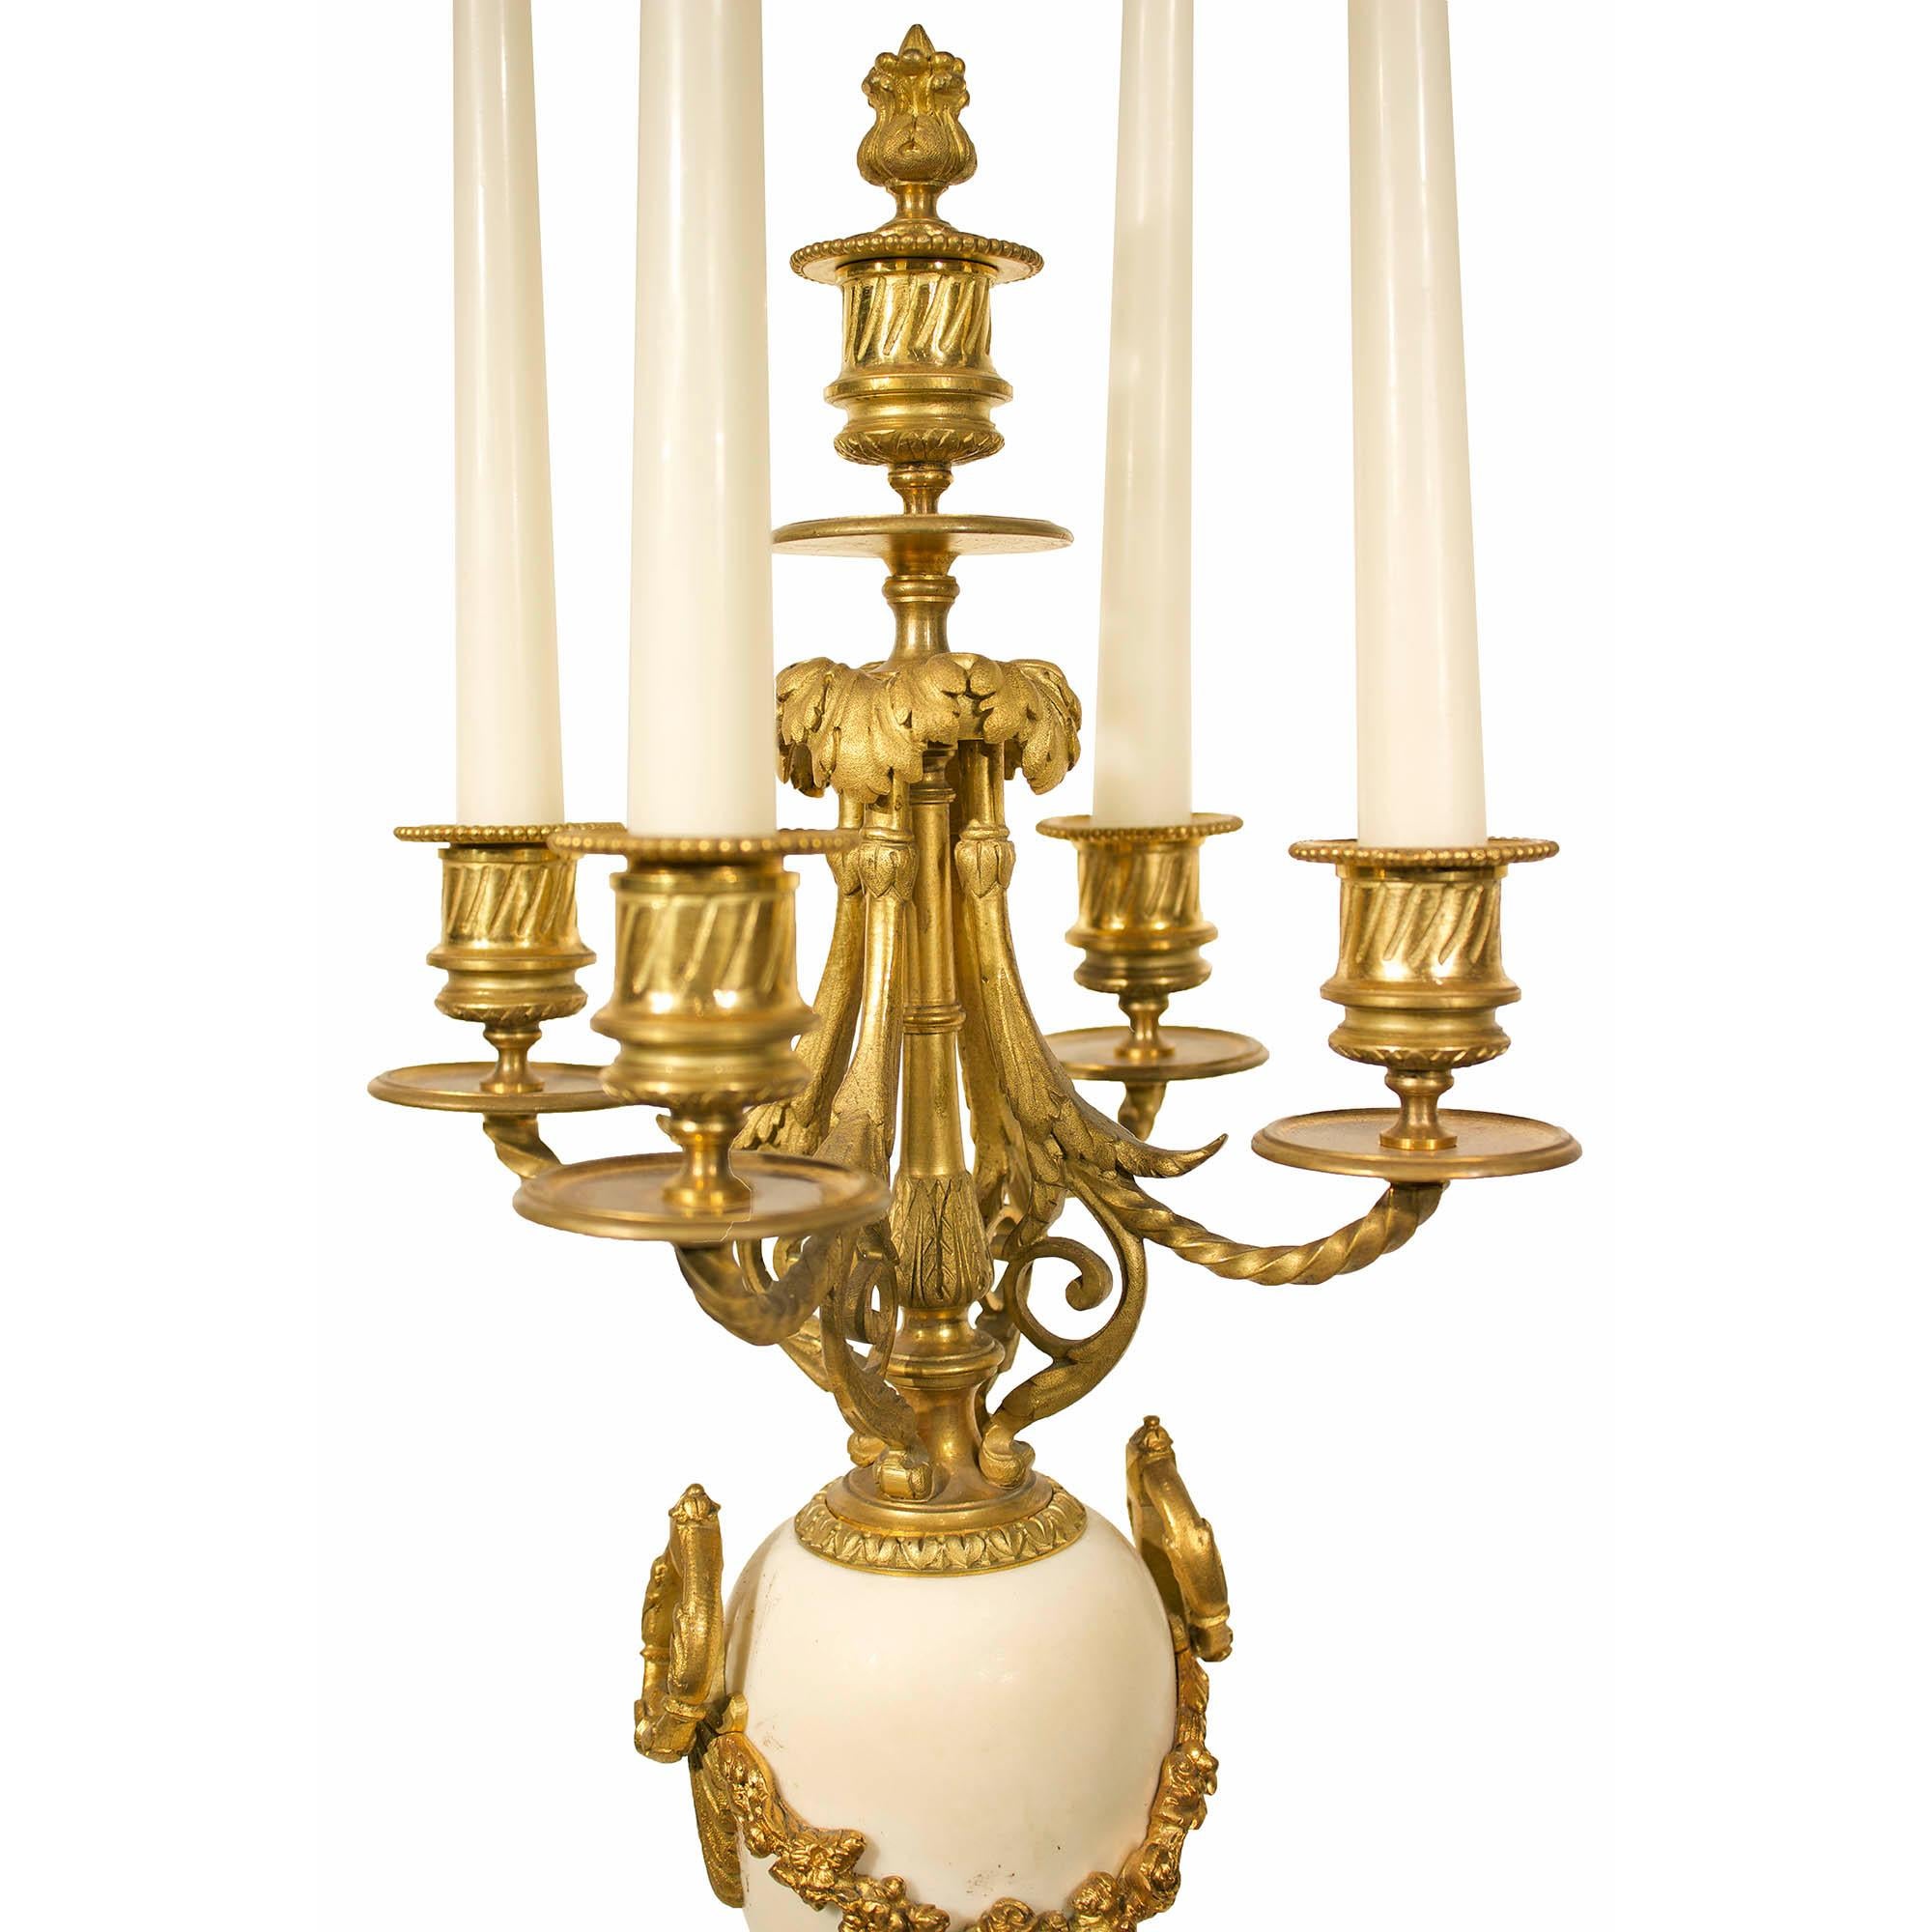 Pair of French Mid-19th Century Louis XVI Style Marble and Ormolu Candelabras For Sale 1